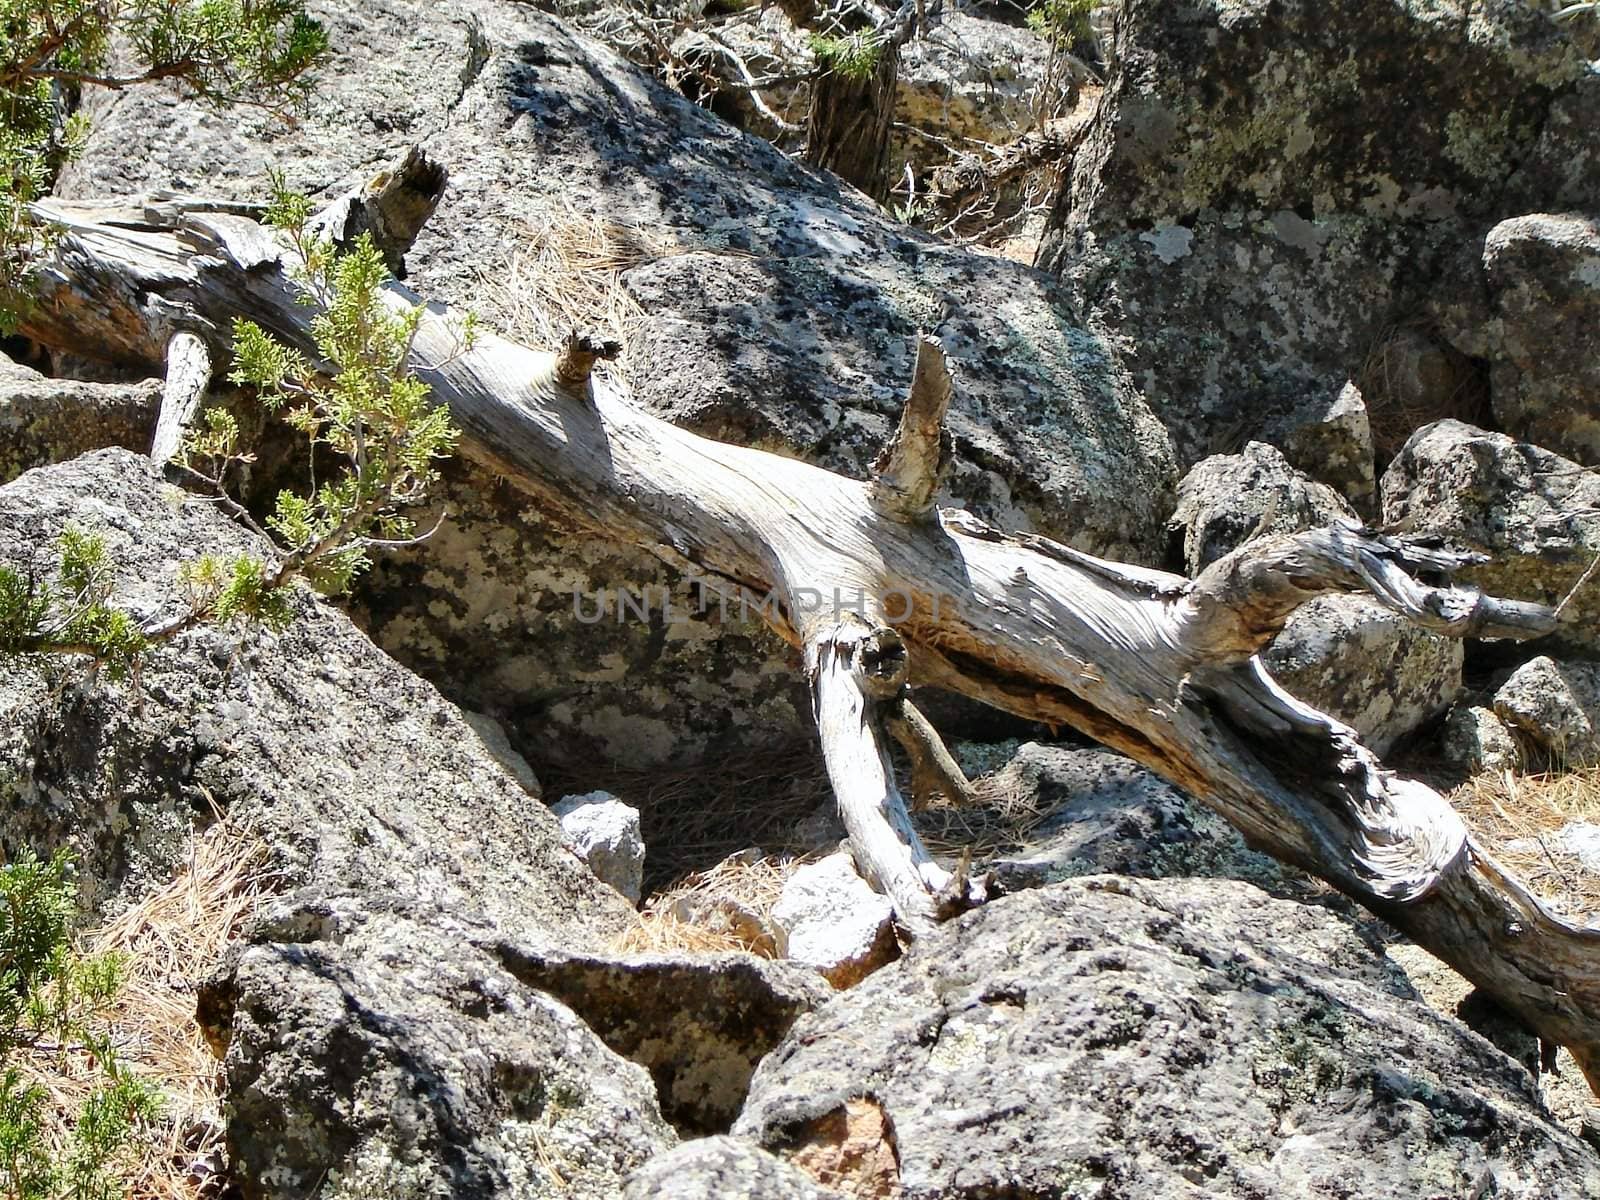 Rocks and branches